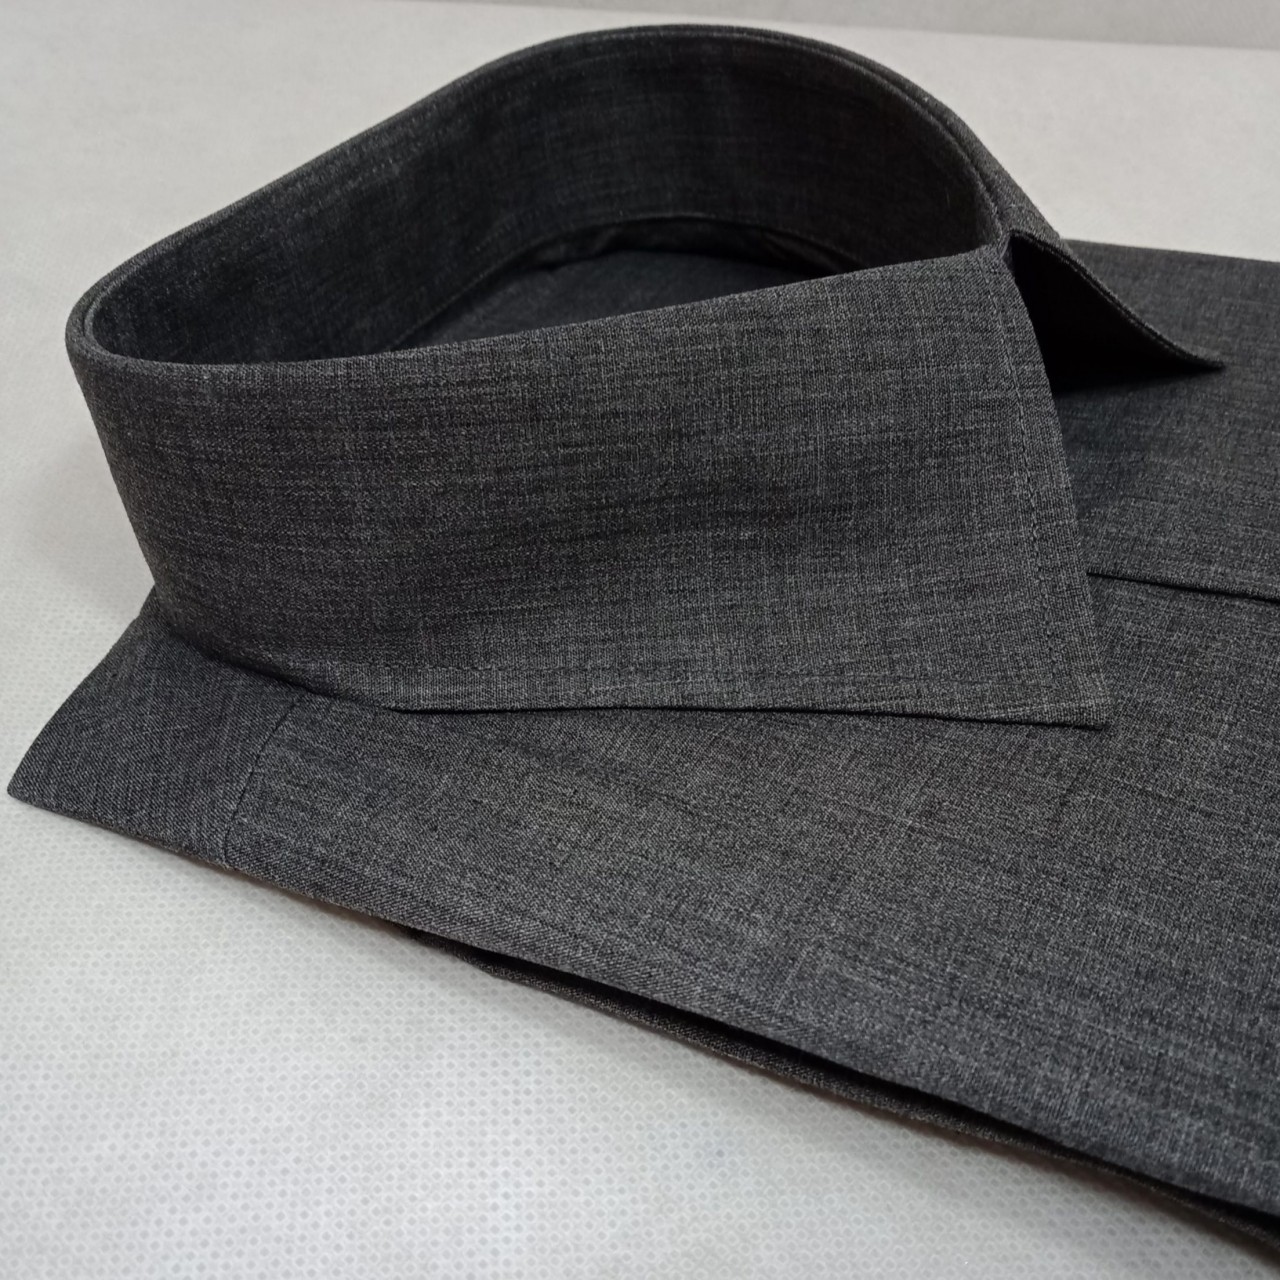 Chambray Formal Shirt For Men - Double Needle Stitching - Dark Grey